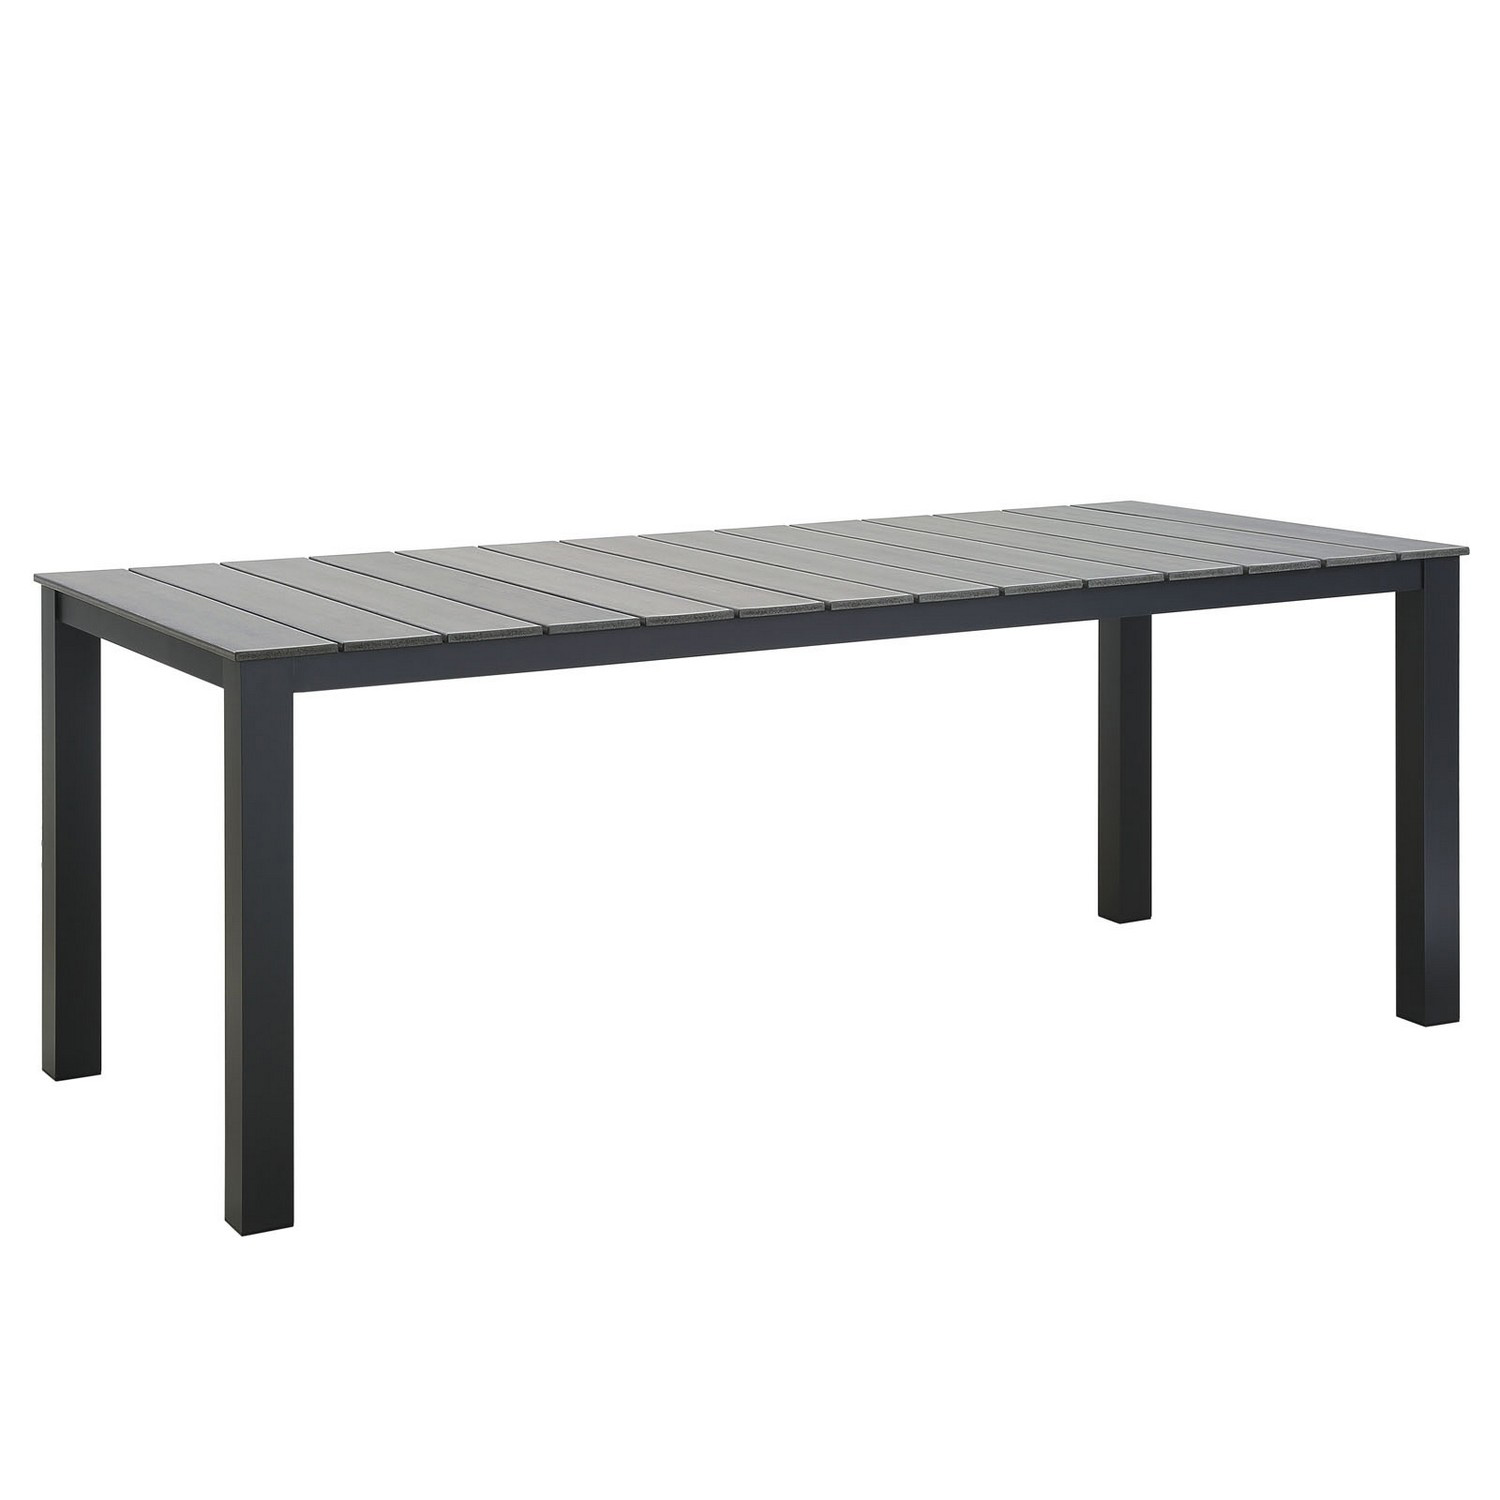 Modway Maine 80 Outdoor Patio Dining Table - Brown/Gray